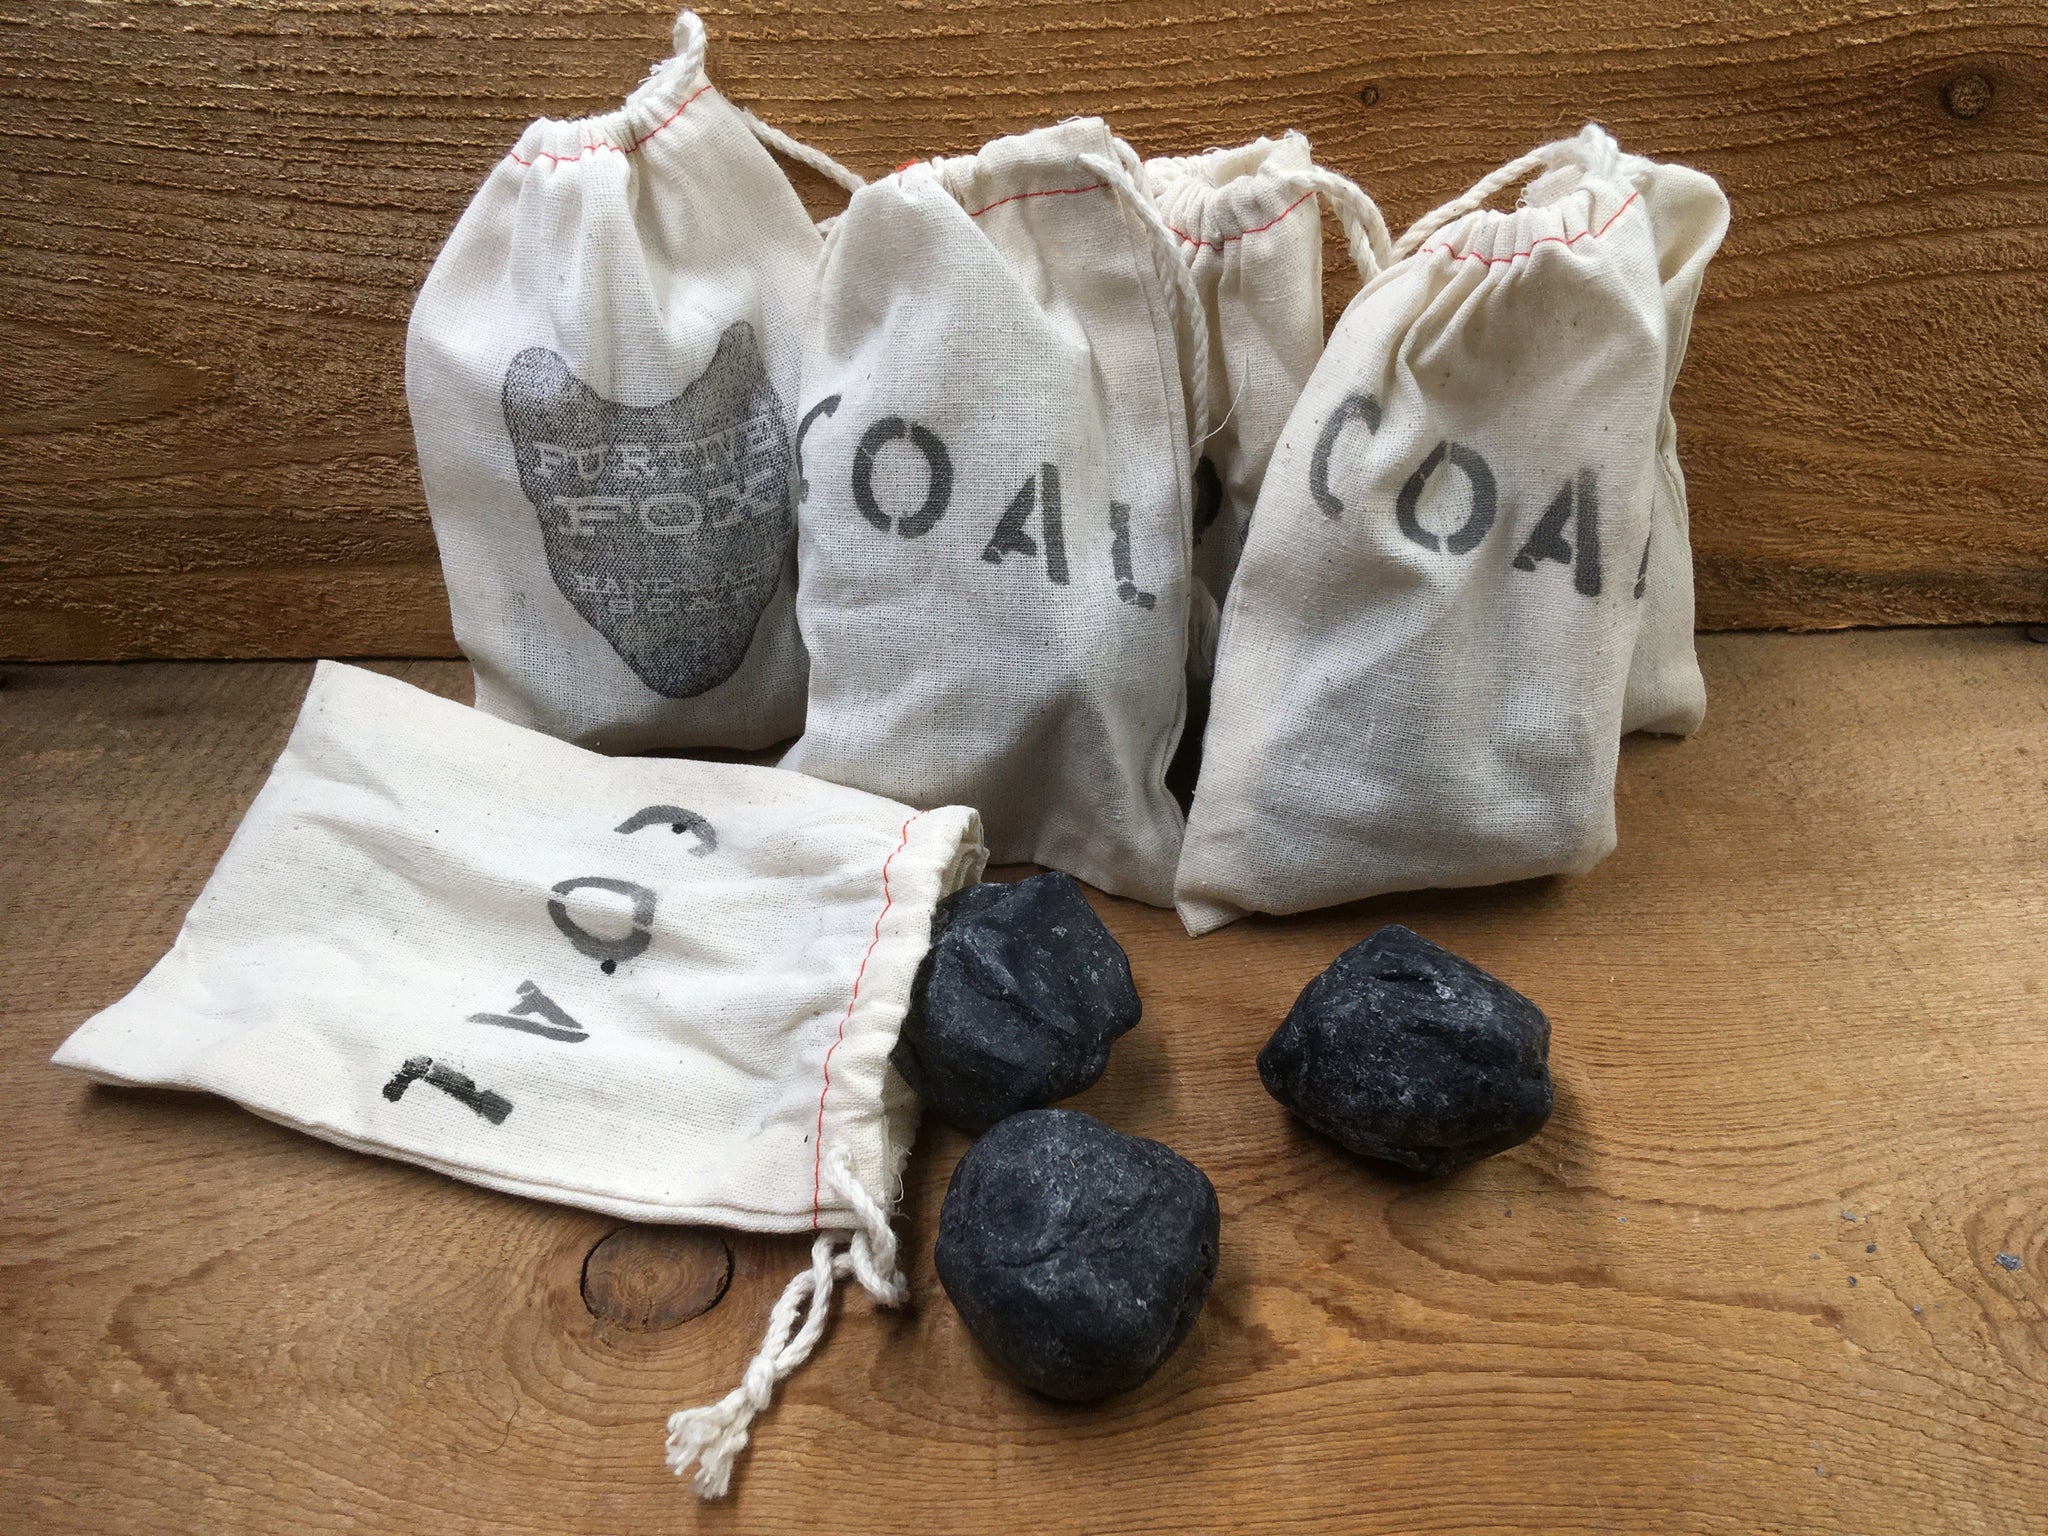 Bag o' COAL hand soap with spruce, rosemary, thyme & charcoal